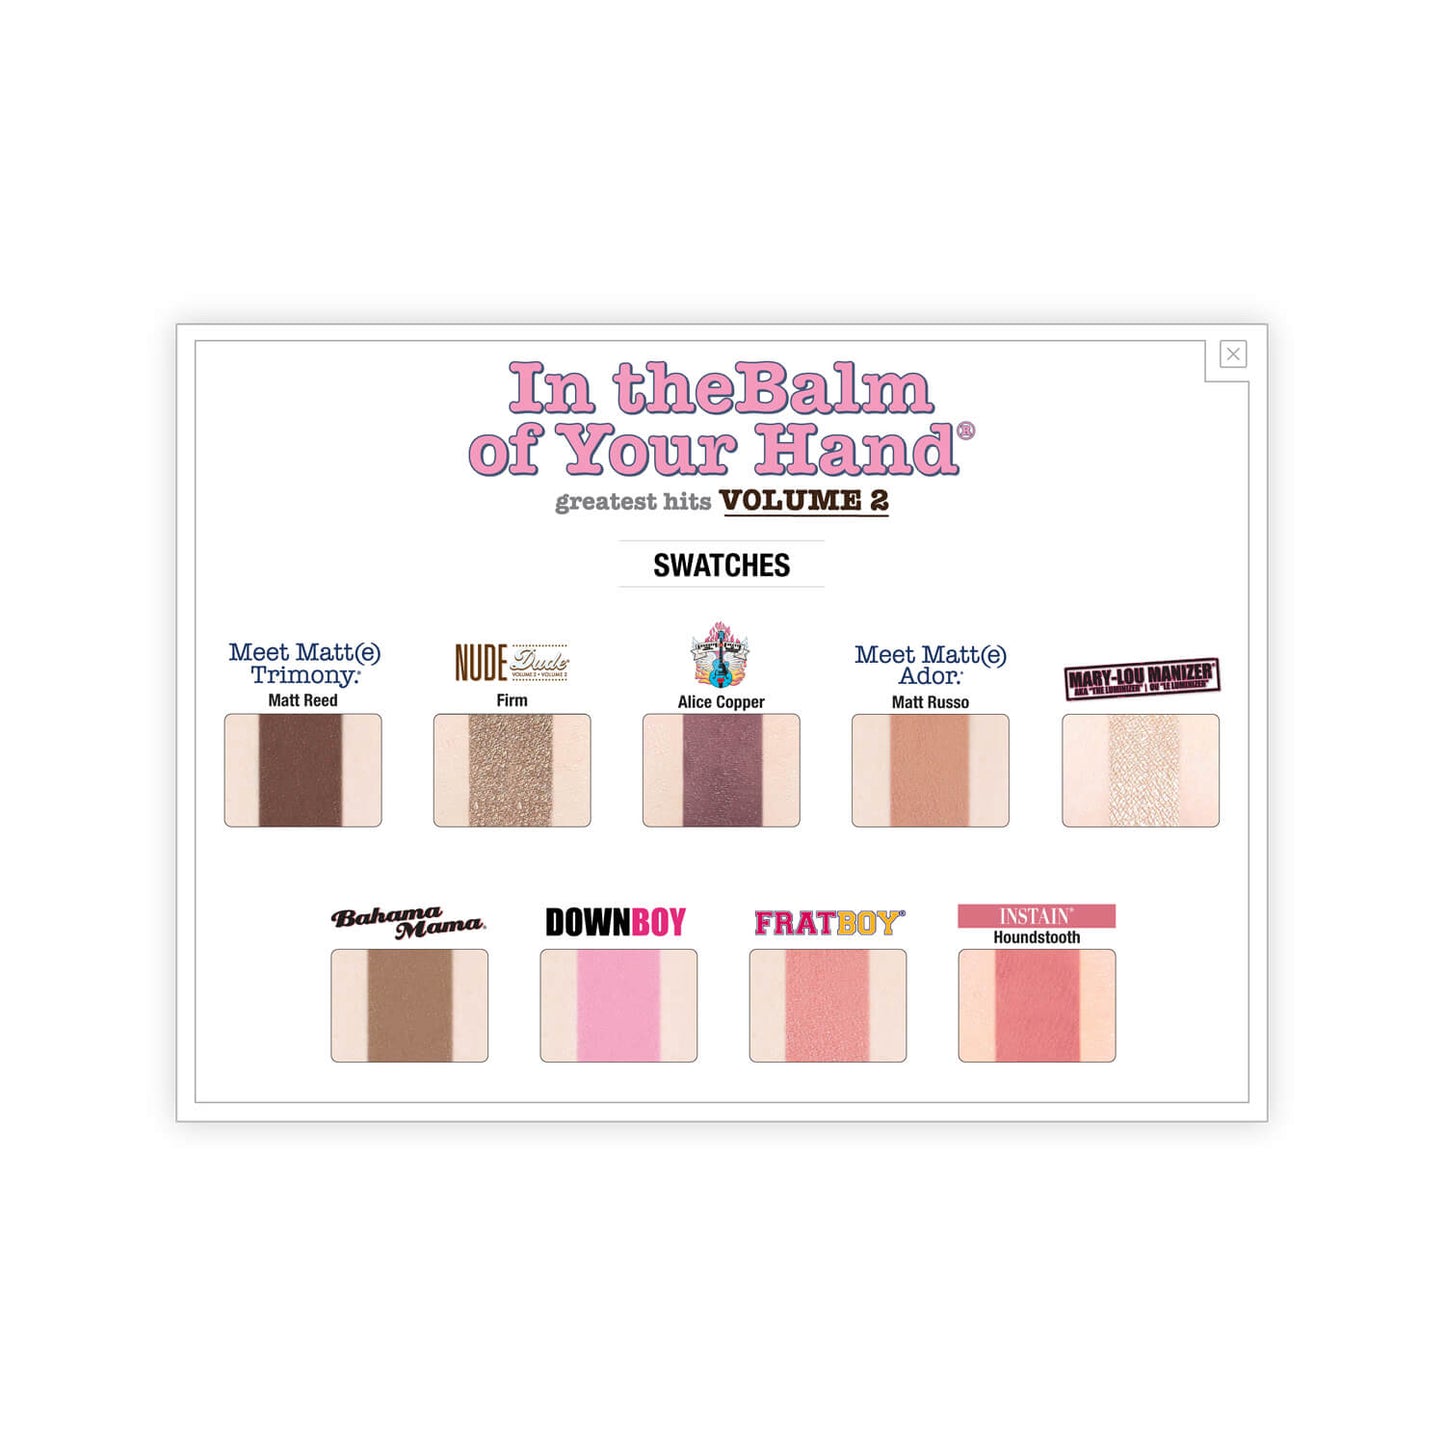 theBalm In theBalm of Your Hand Greatest Hits Volume 2 Palette Swatches